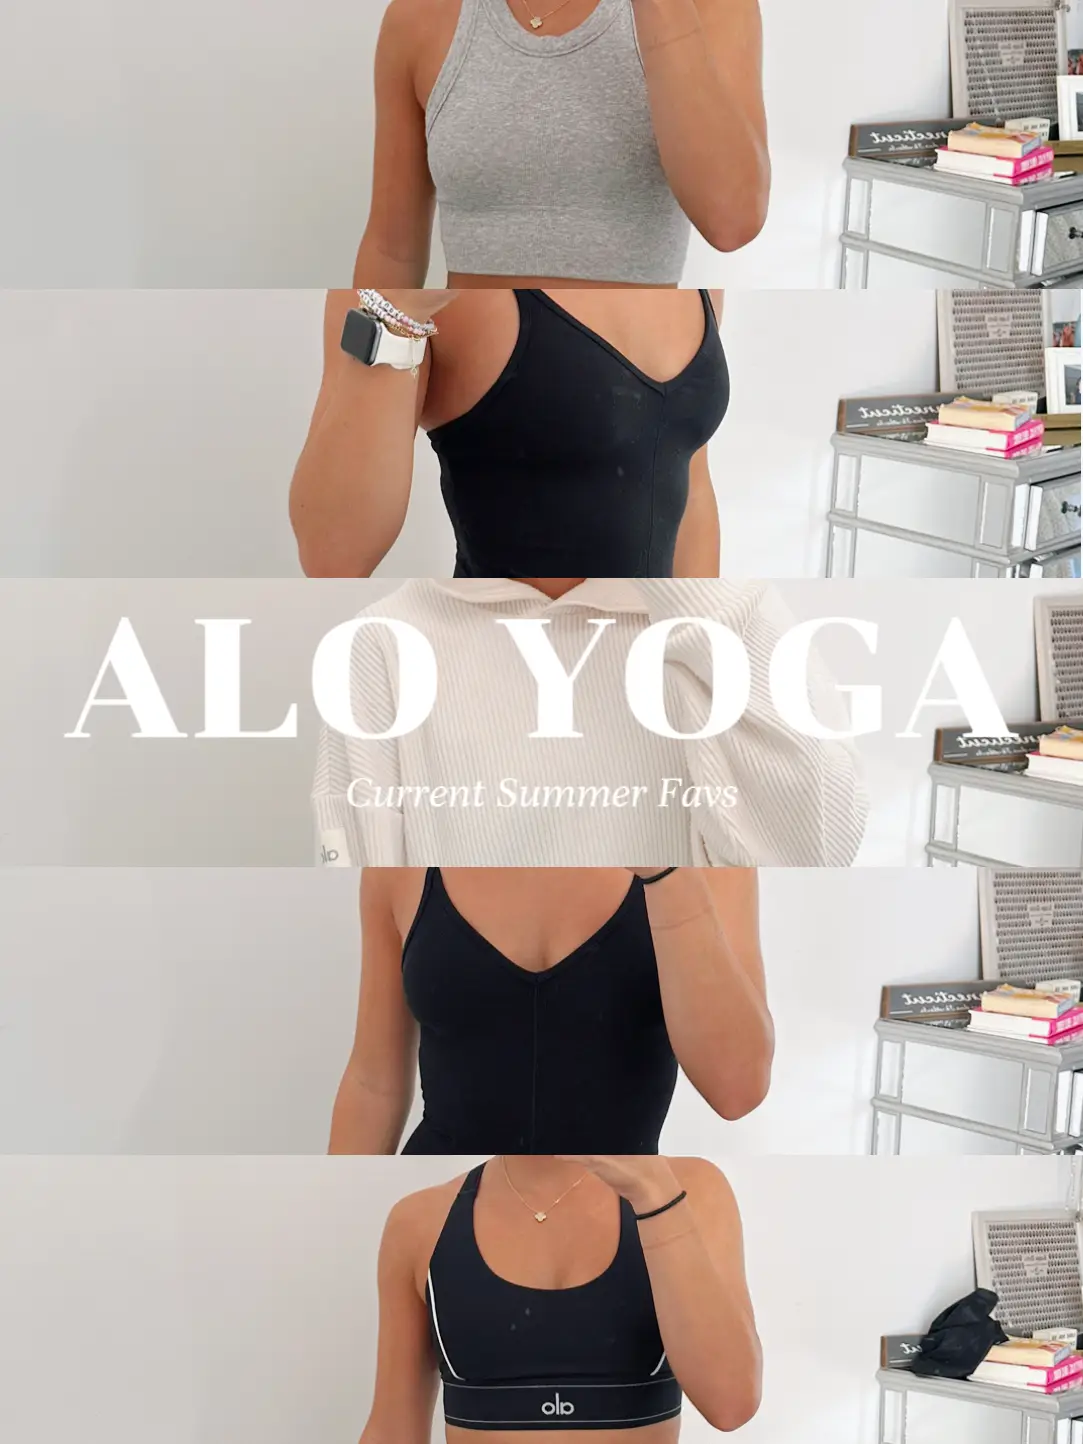 ALO YOGA HAUL, Gallery posted by Jess Bristow